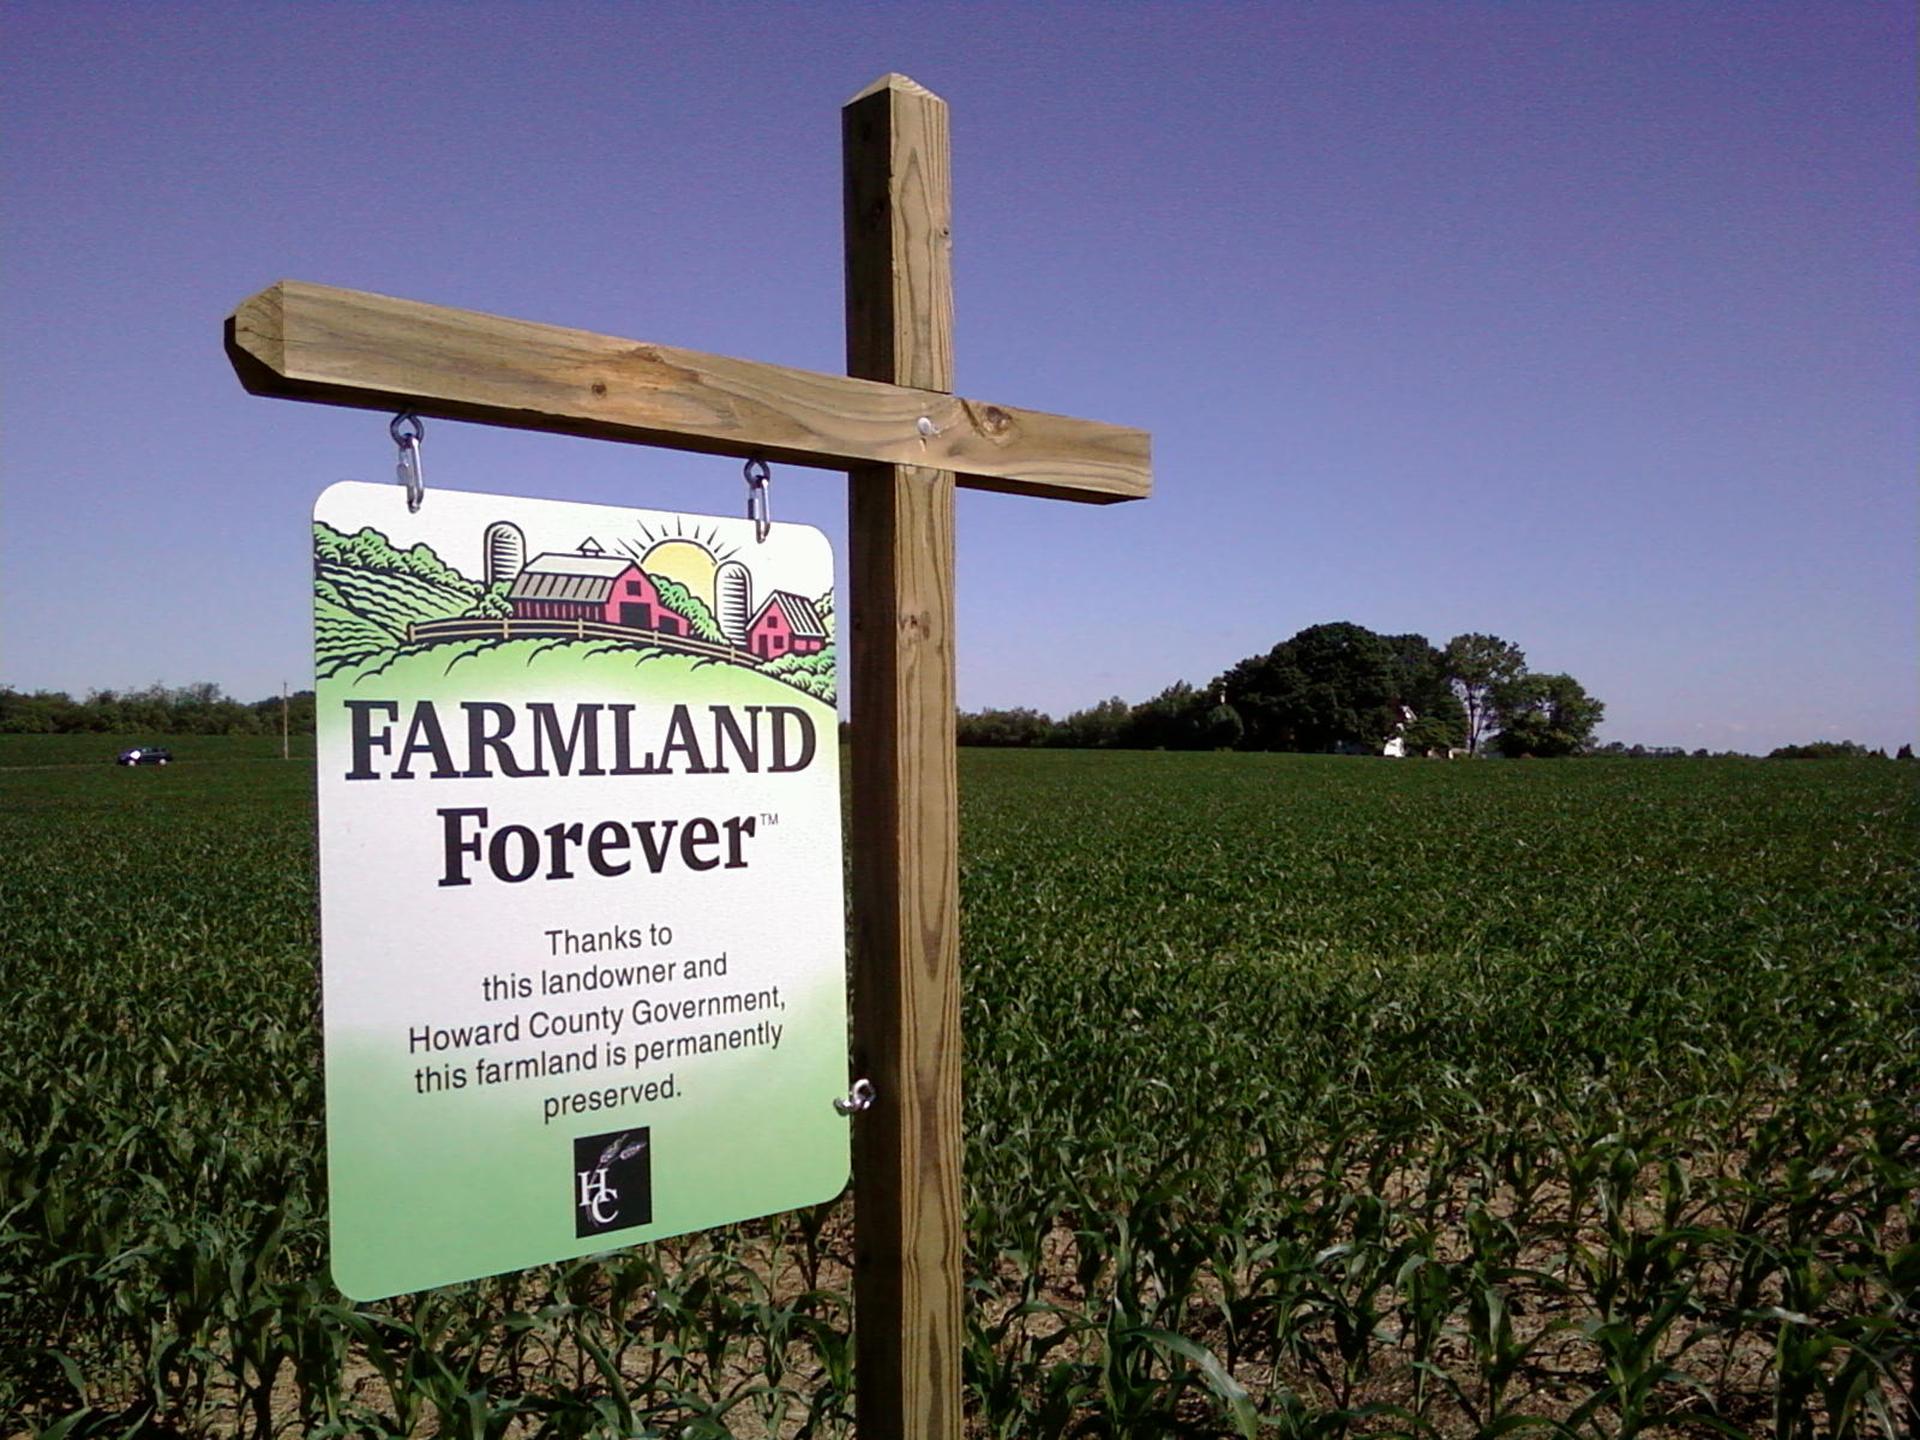 Sign in field that reads Farmland Forever thanks to this landowner and howard county government this farmland is permanently preserved